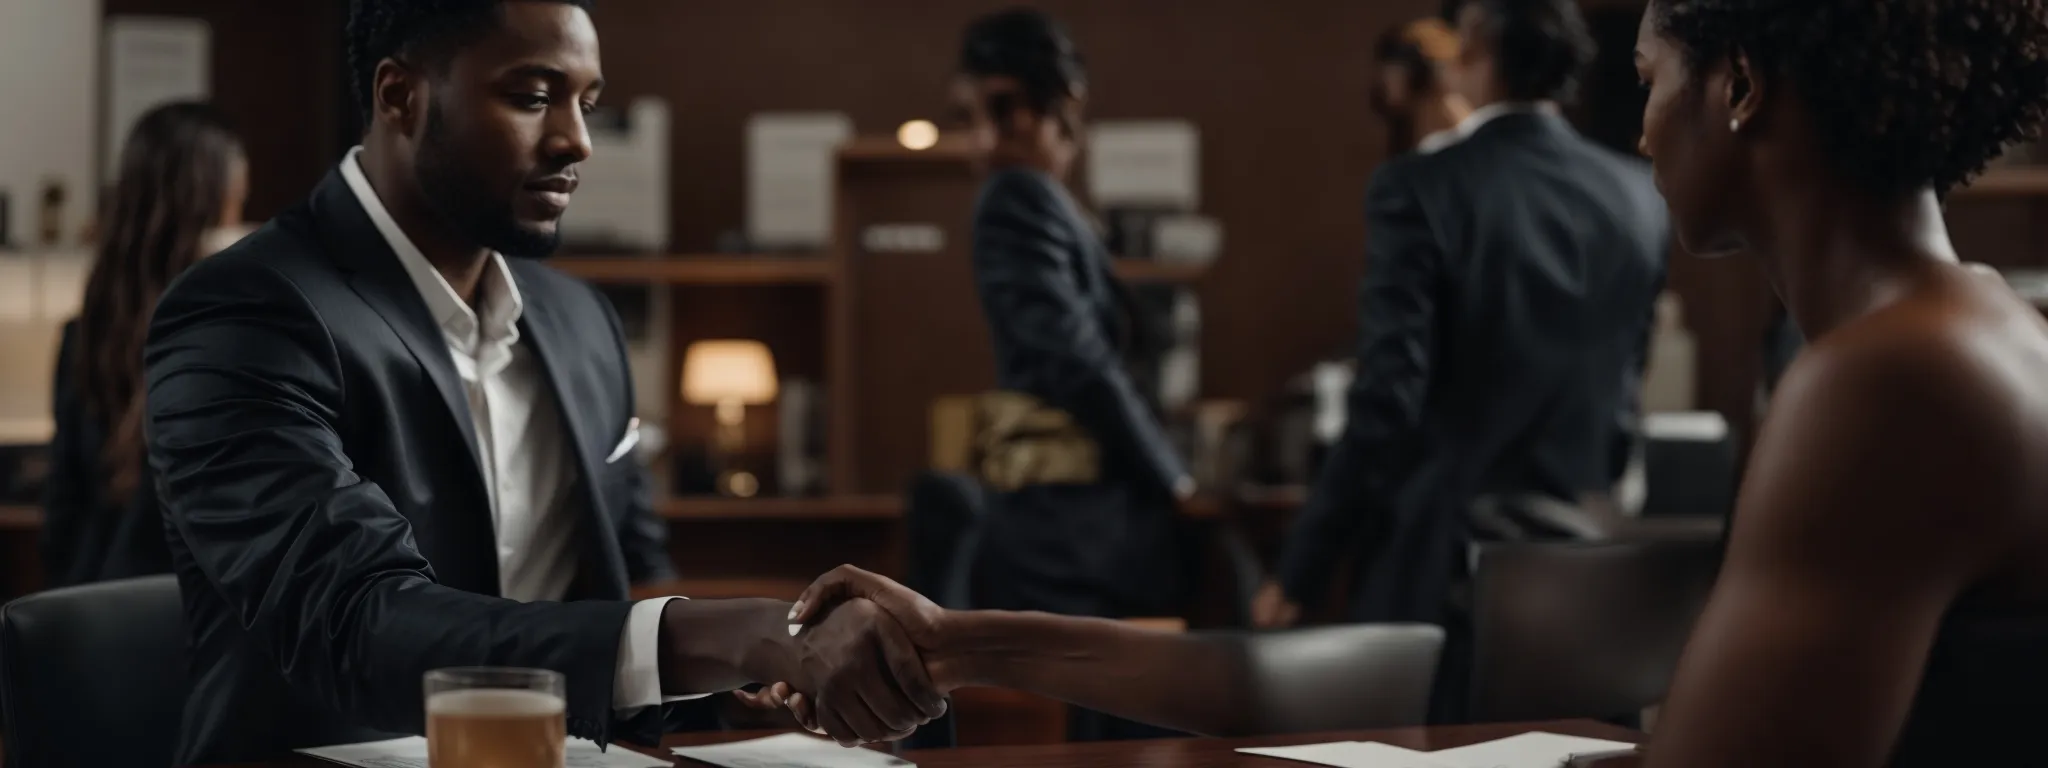 a confident individual shakes hands with a partner across a sleek, modern desk, symbolizing the establishment of a powerful business connection.